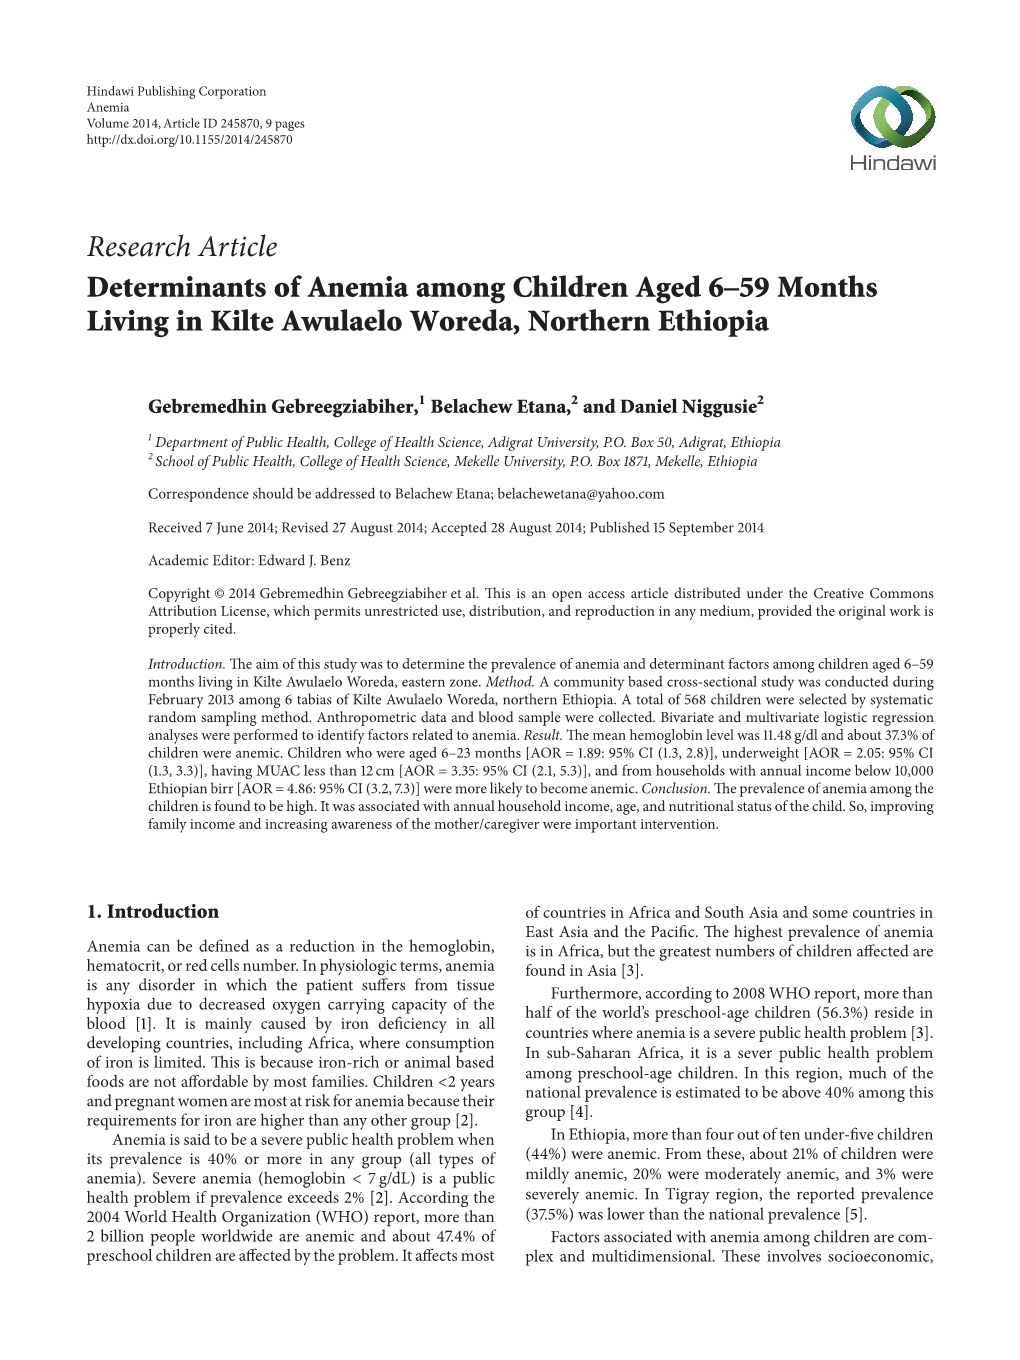 Research Article Determinants of Anemia Among Children Aged 6–59 Months Living in Kilte Awulaelo Woreda, Northern Ethiopia